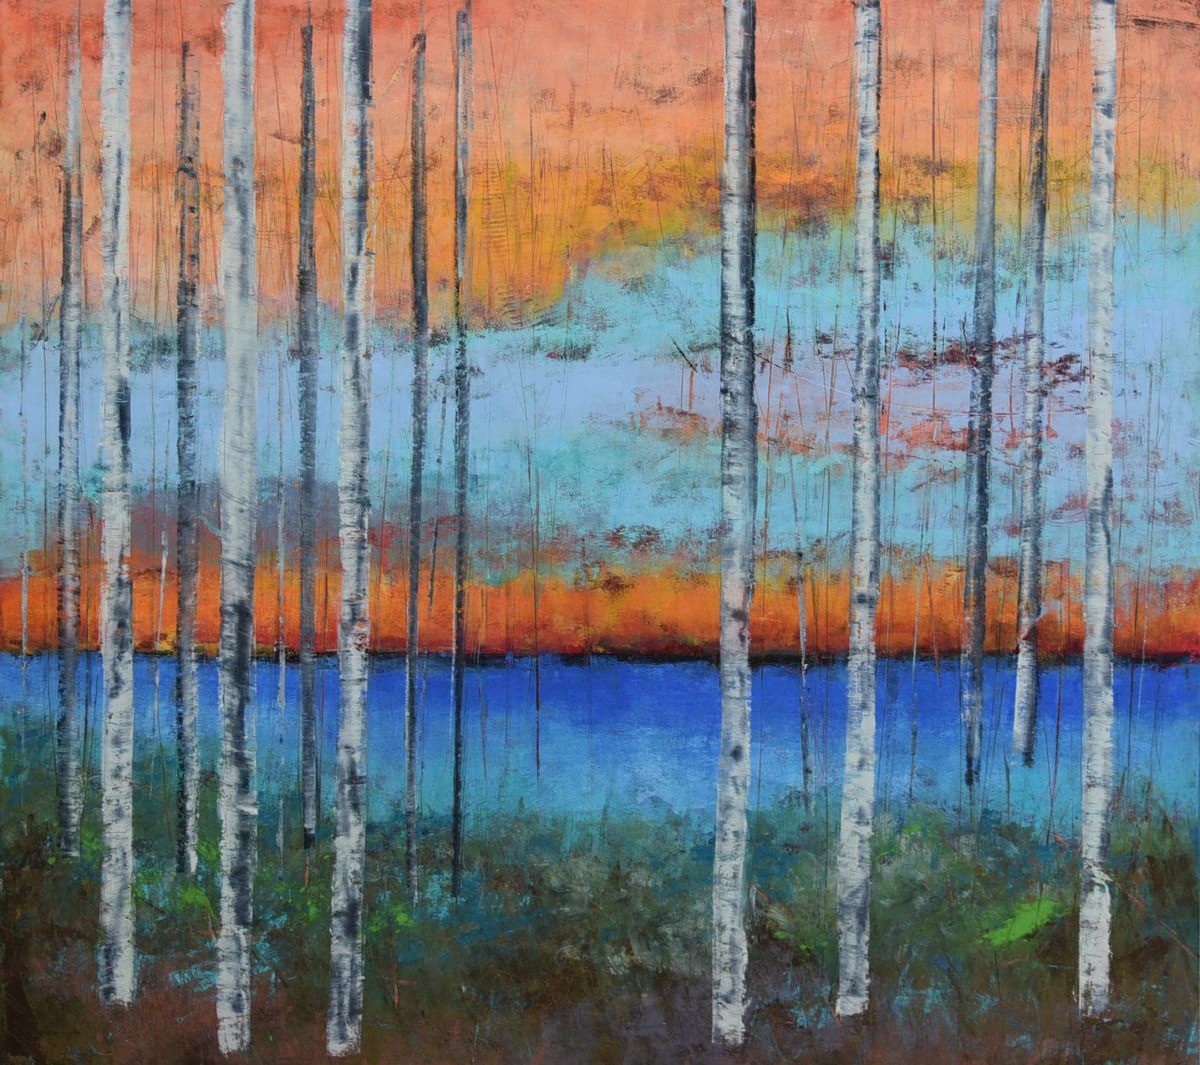 Evening by the Lake, 42x42" by Ginnie Cappaert 